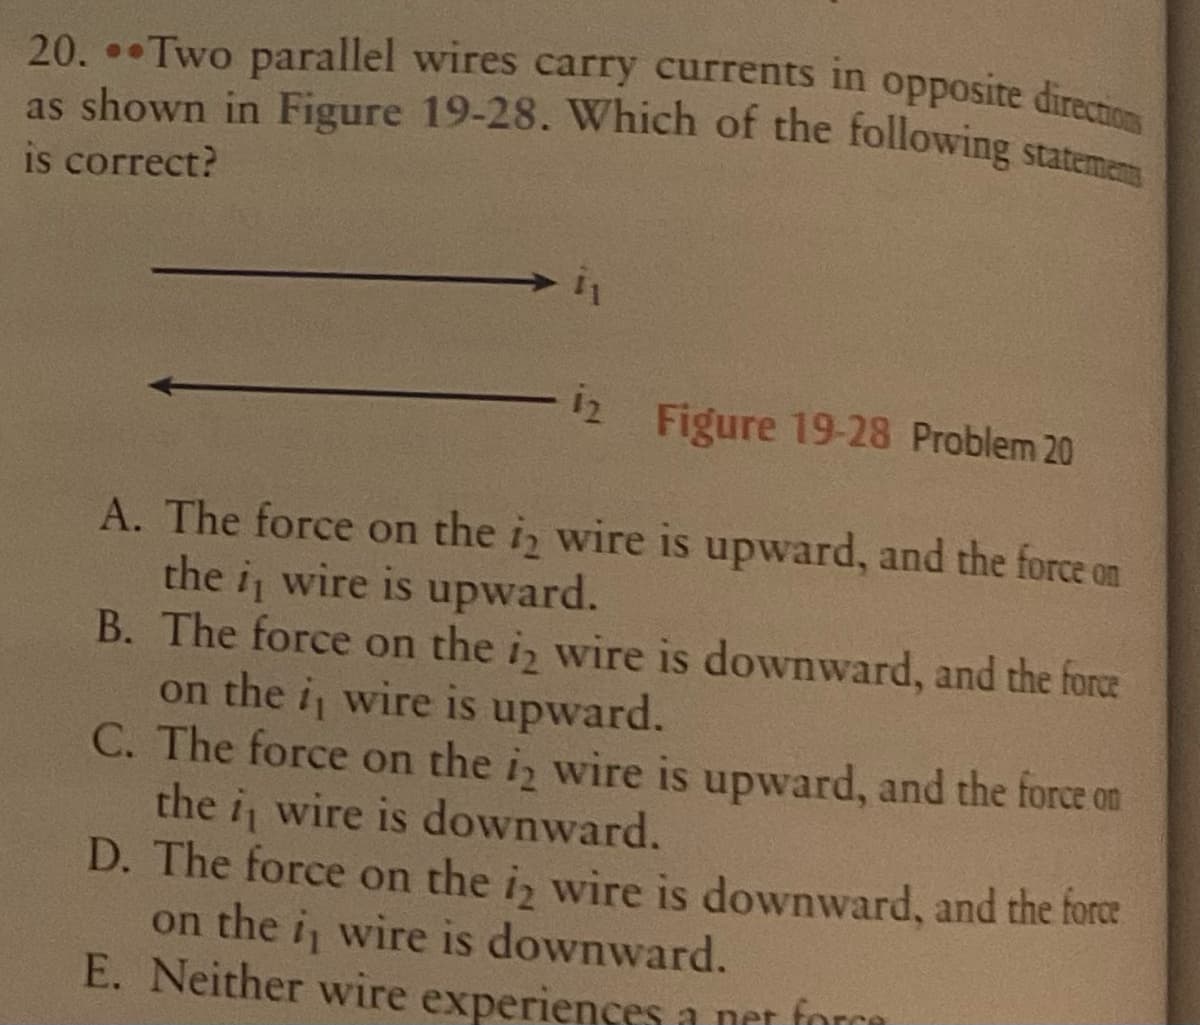 as shown in Figure 19-28. Which of the following statemens
20. Two parallel wires carry currents in opposite directions
is correct?
12 Figure 19-28 Problem 20
A. The force on the iz wire is upward, and the force on
the i wire is upward.
B. The force on the i wire is downward, and the force
on the i wire is upward.
C. The force on the iz wire is upward, and the force on
the i wire is downward.
D. The force on the i, wire is downward, and the force
on the i, wire is downward.
E. Neither wire experiences a net force
